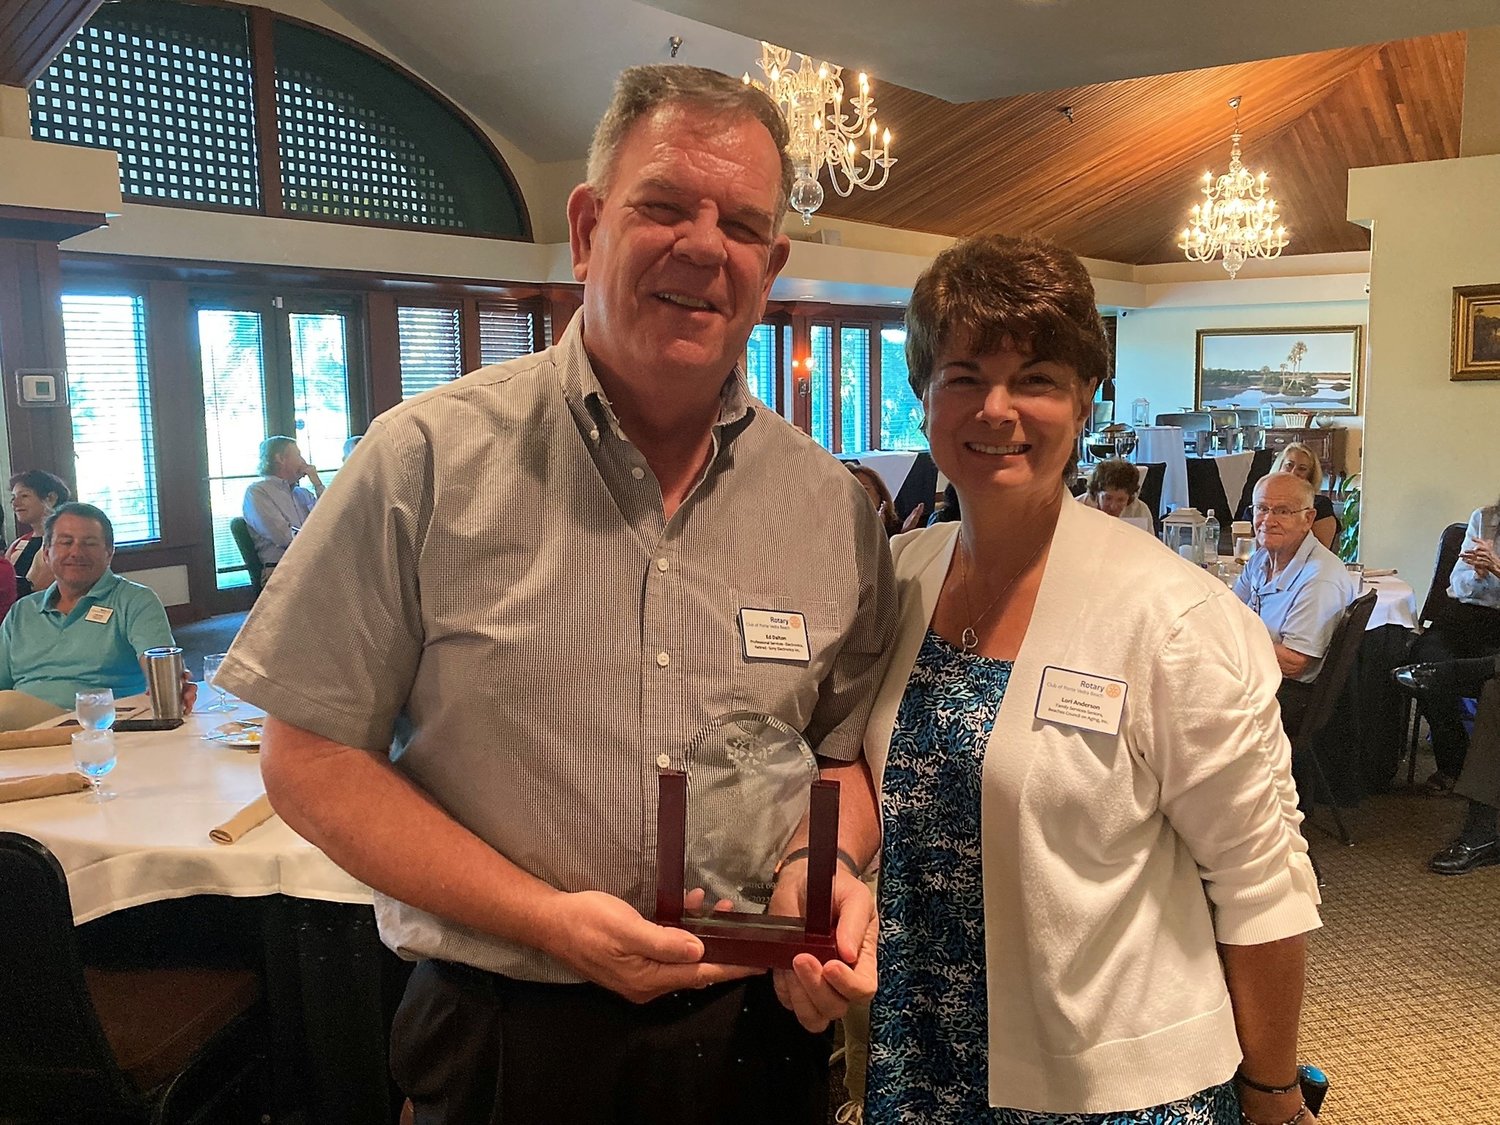 Rotary Club of Ponte Vedra Beach President Lori Anderson, right, congratulates Ed Dalton on his award from Rotary District 6970. Dalton recently received the award for his services as webmaster for both the district and the Ponte Vedra Beach club.